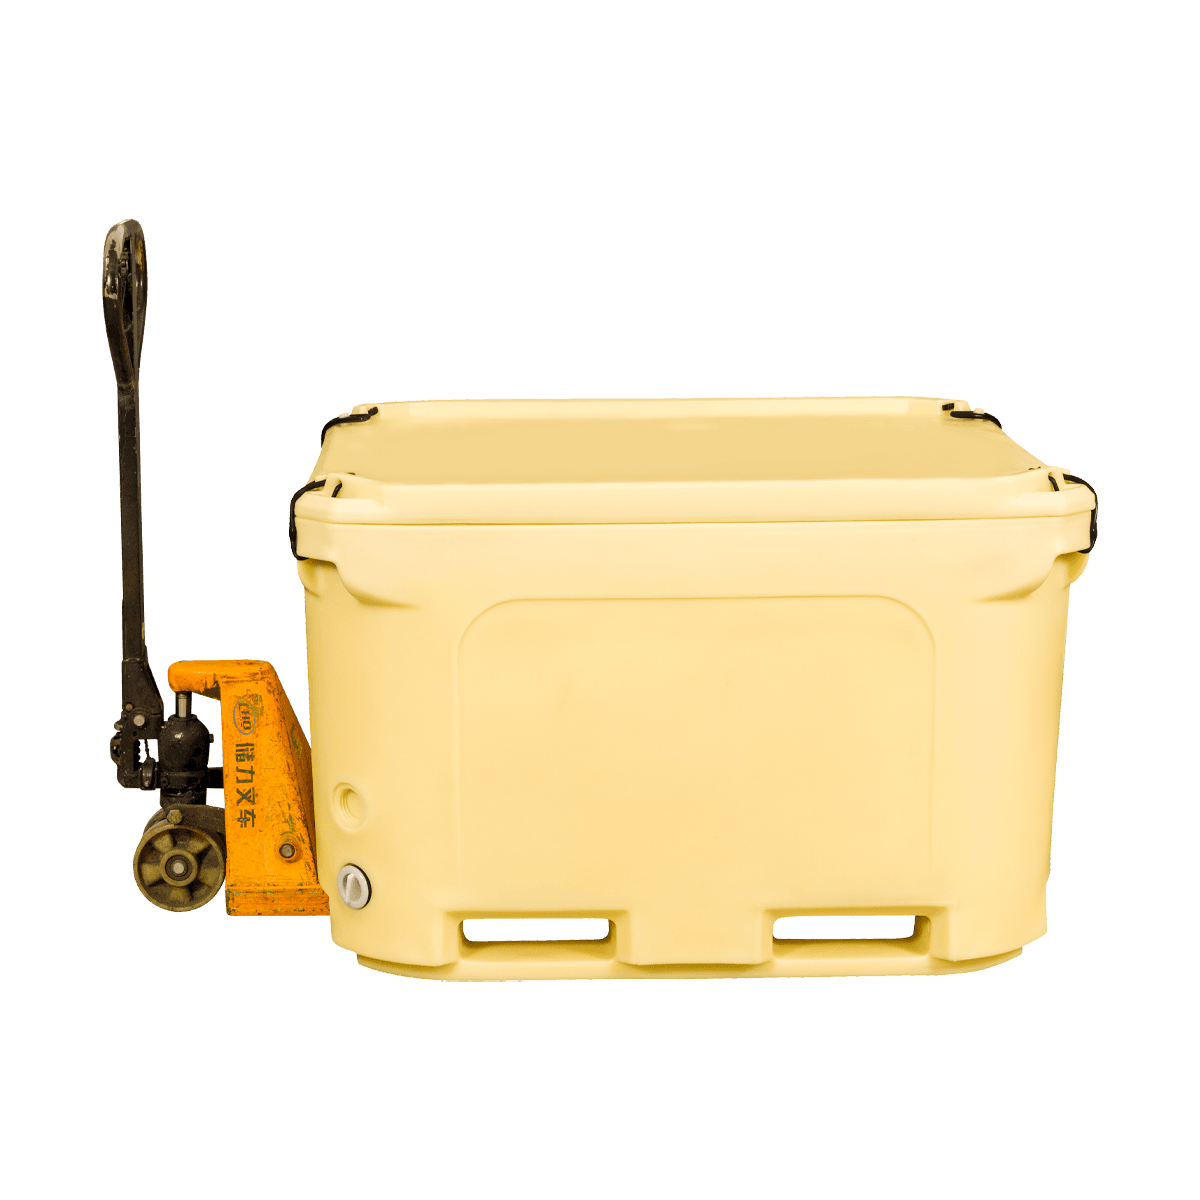 F-660L Insulated Fish Containers Seafood Industrial Use Plastic Containers